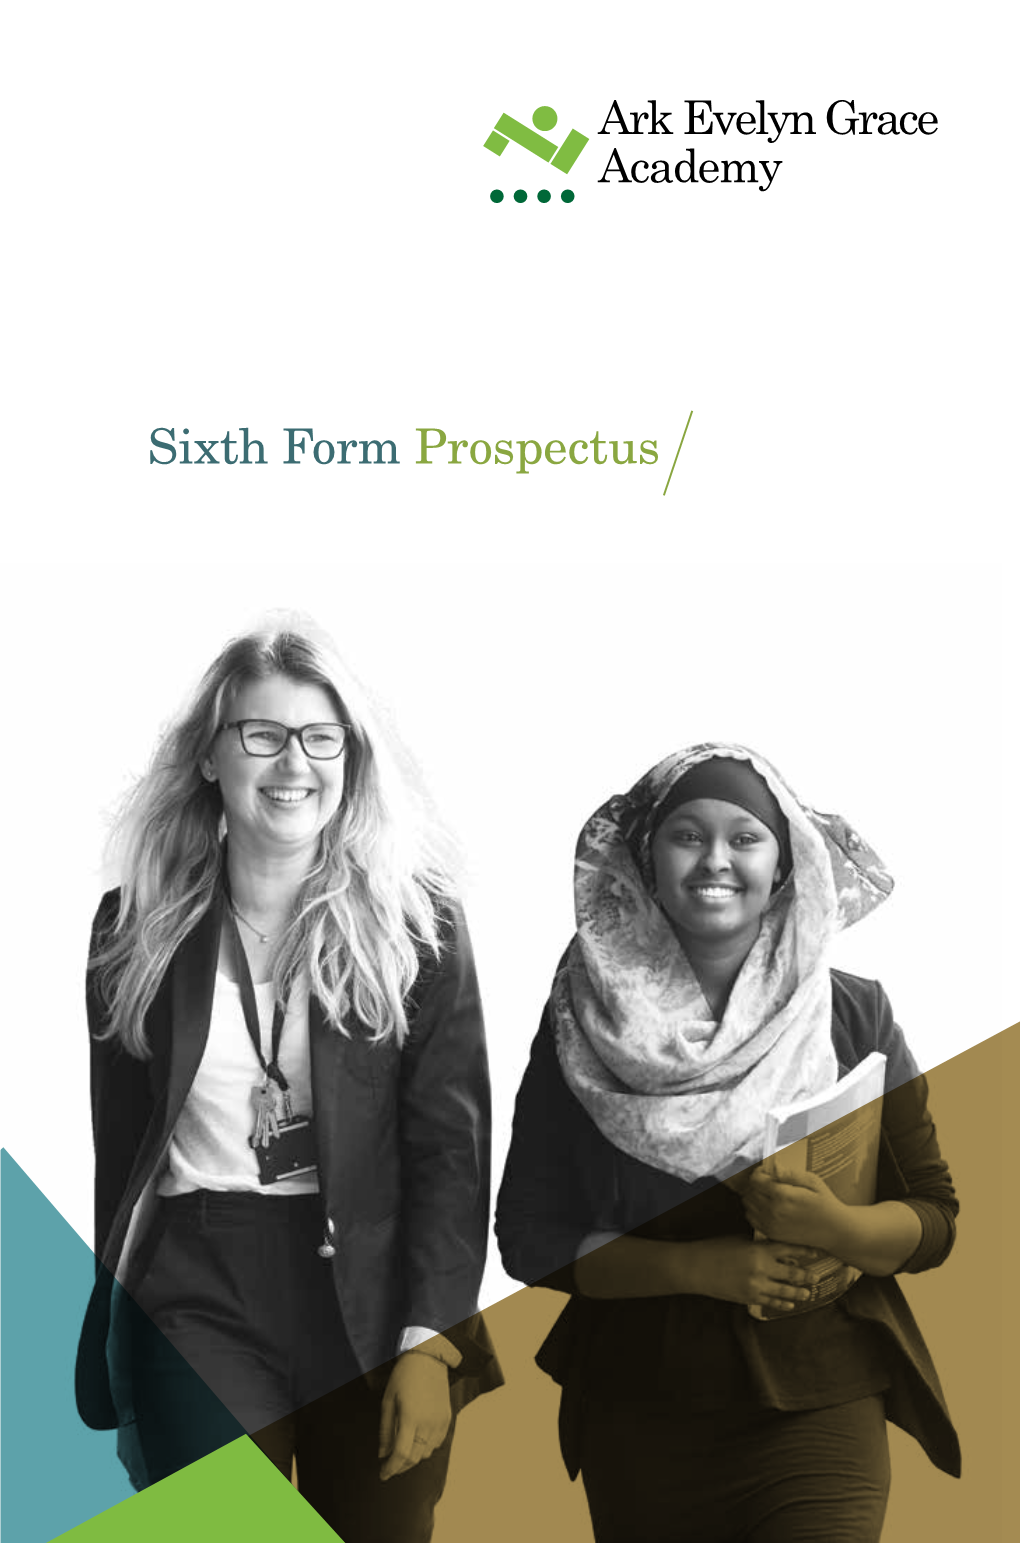 Sixth Form Prospectus We Would Like to Welcome You to Evelyn Grace Academy’S Sixth Form